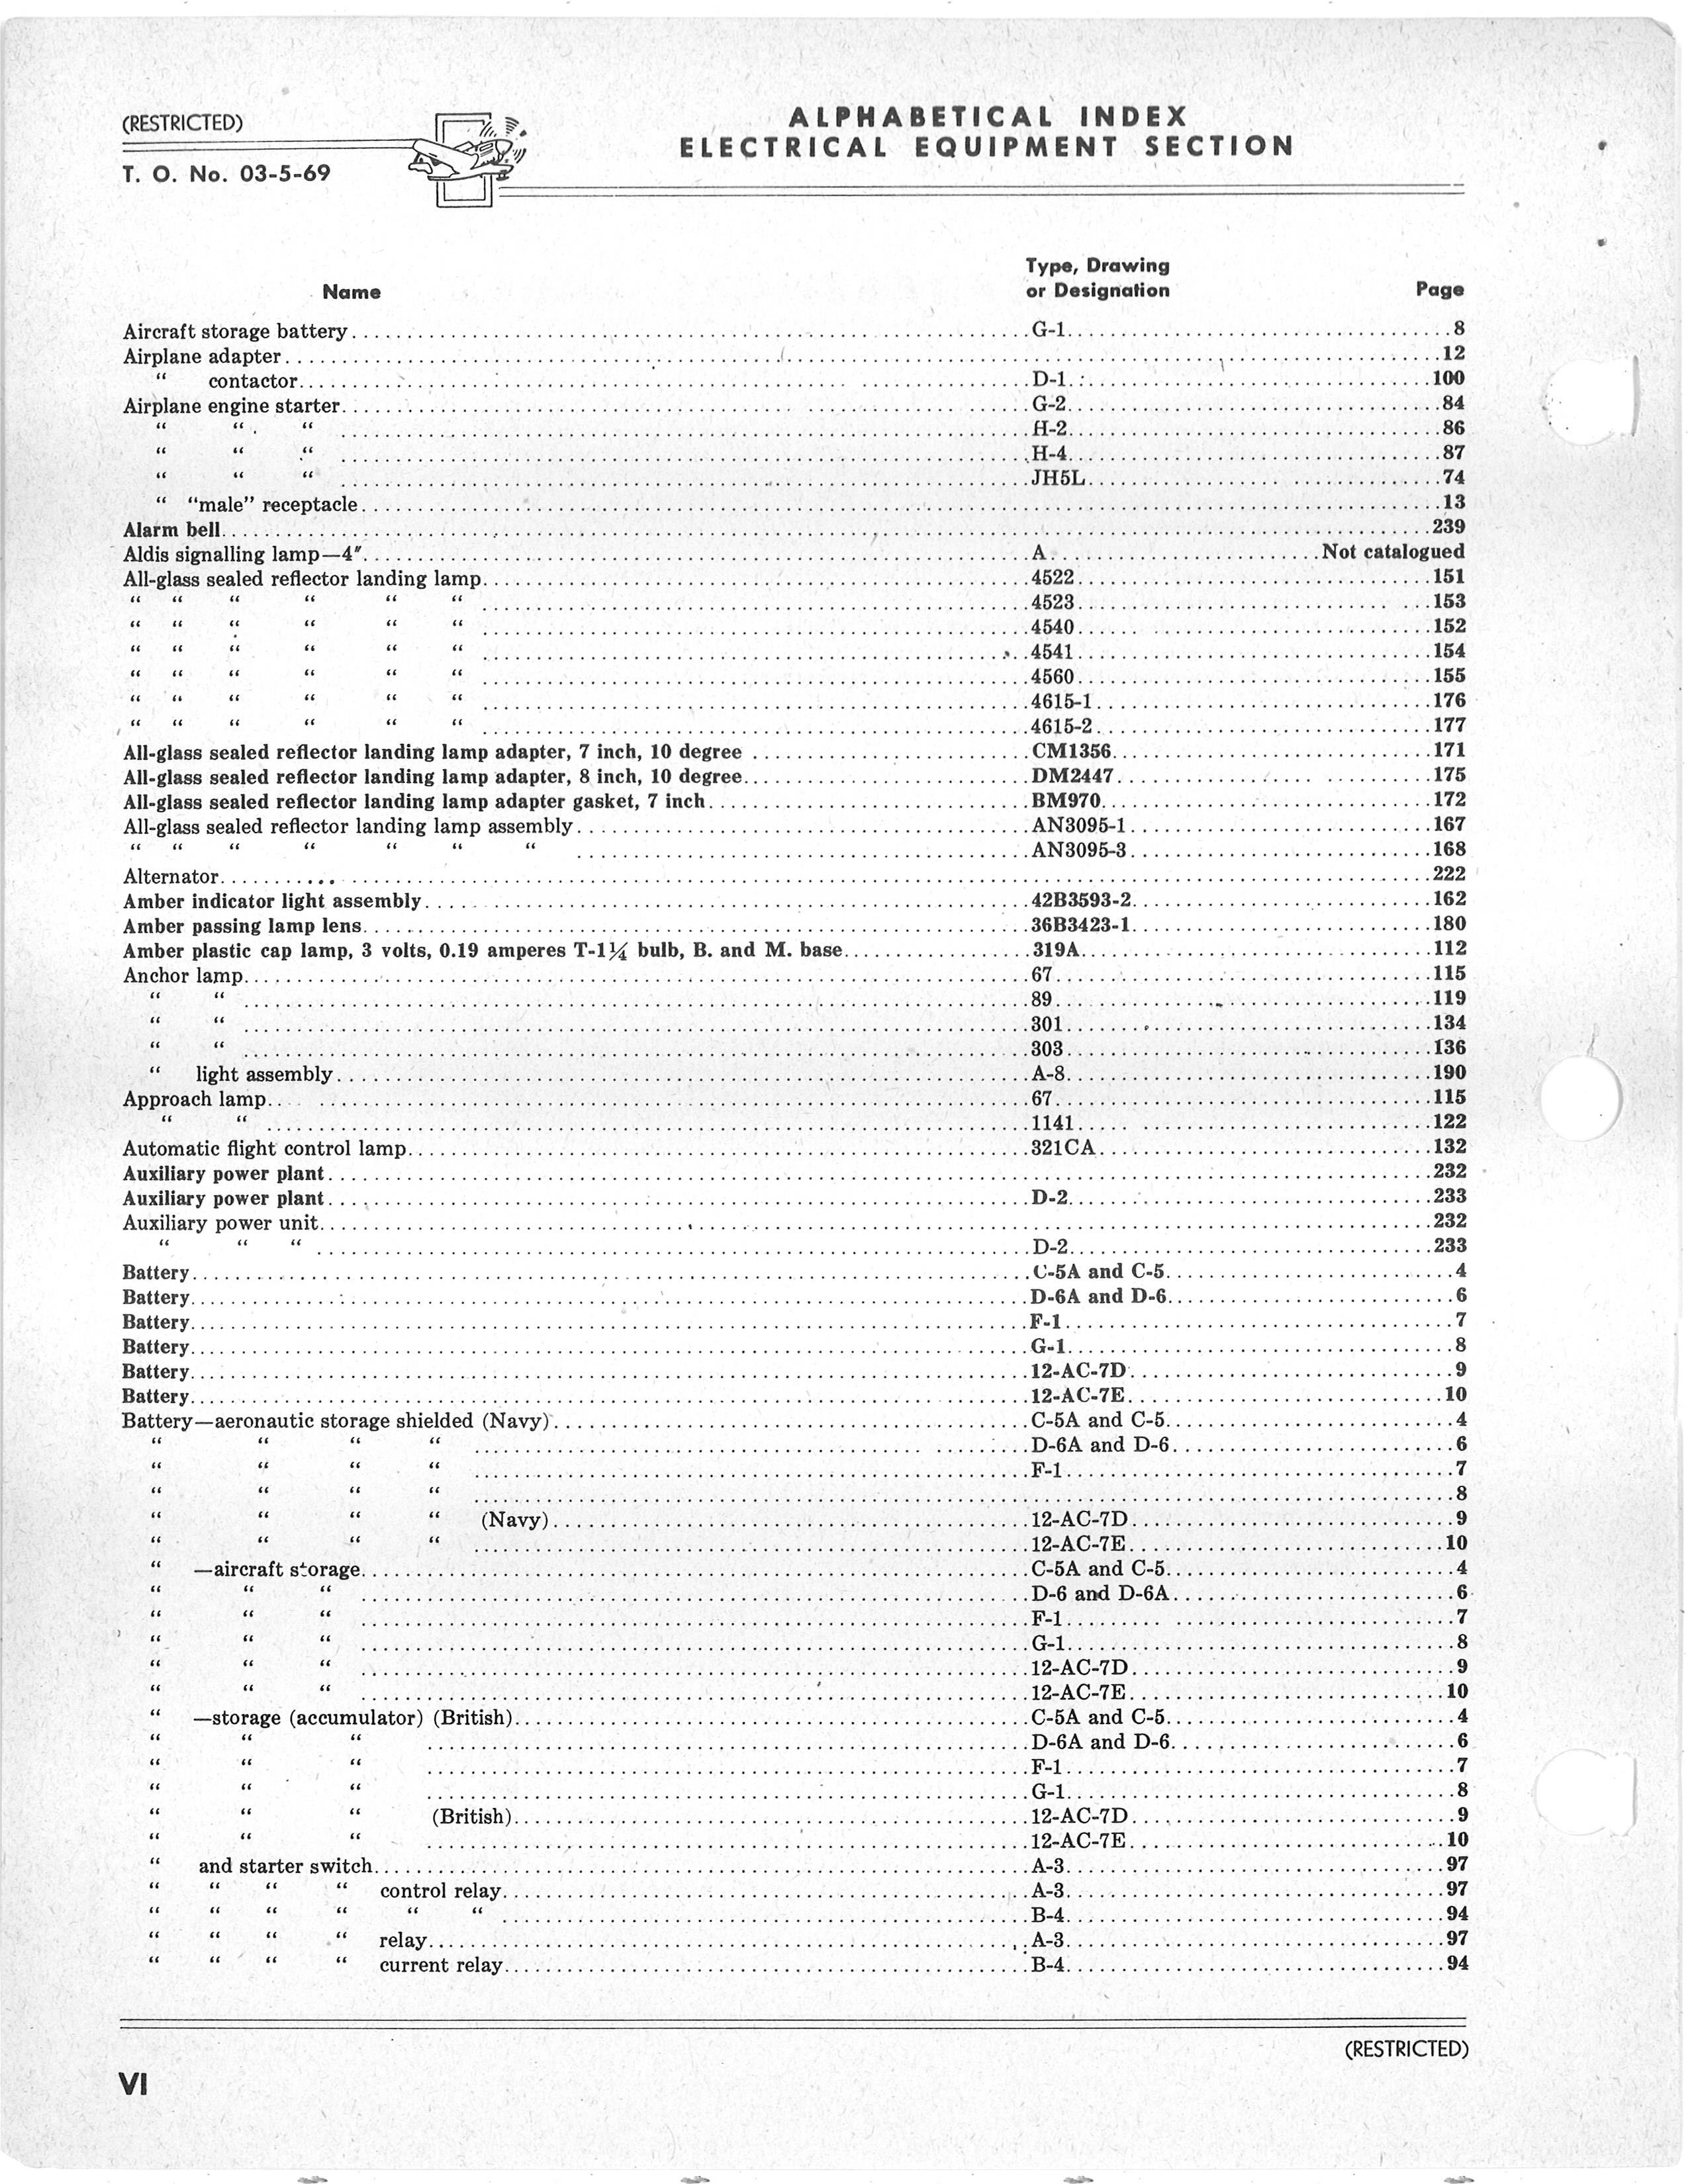 Sample page 8 from AirCorps Library document: Index of Army Navy Electrical, Aeronautical Equipment